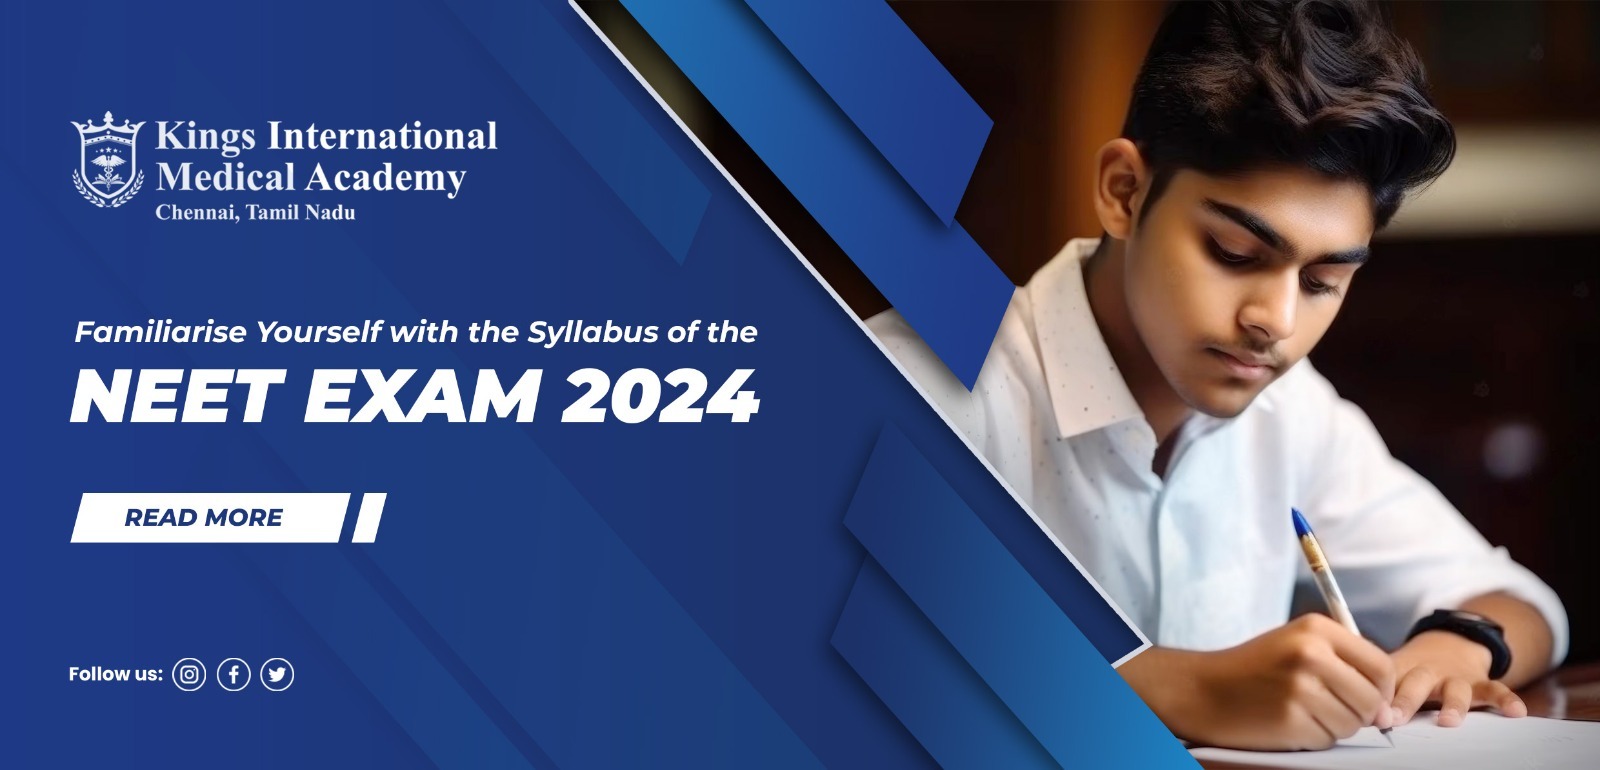 Familiarise Yourself with the Syllabus of the NEET Exam 2024